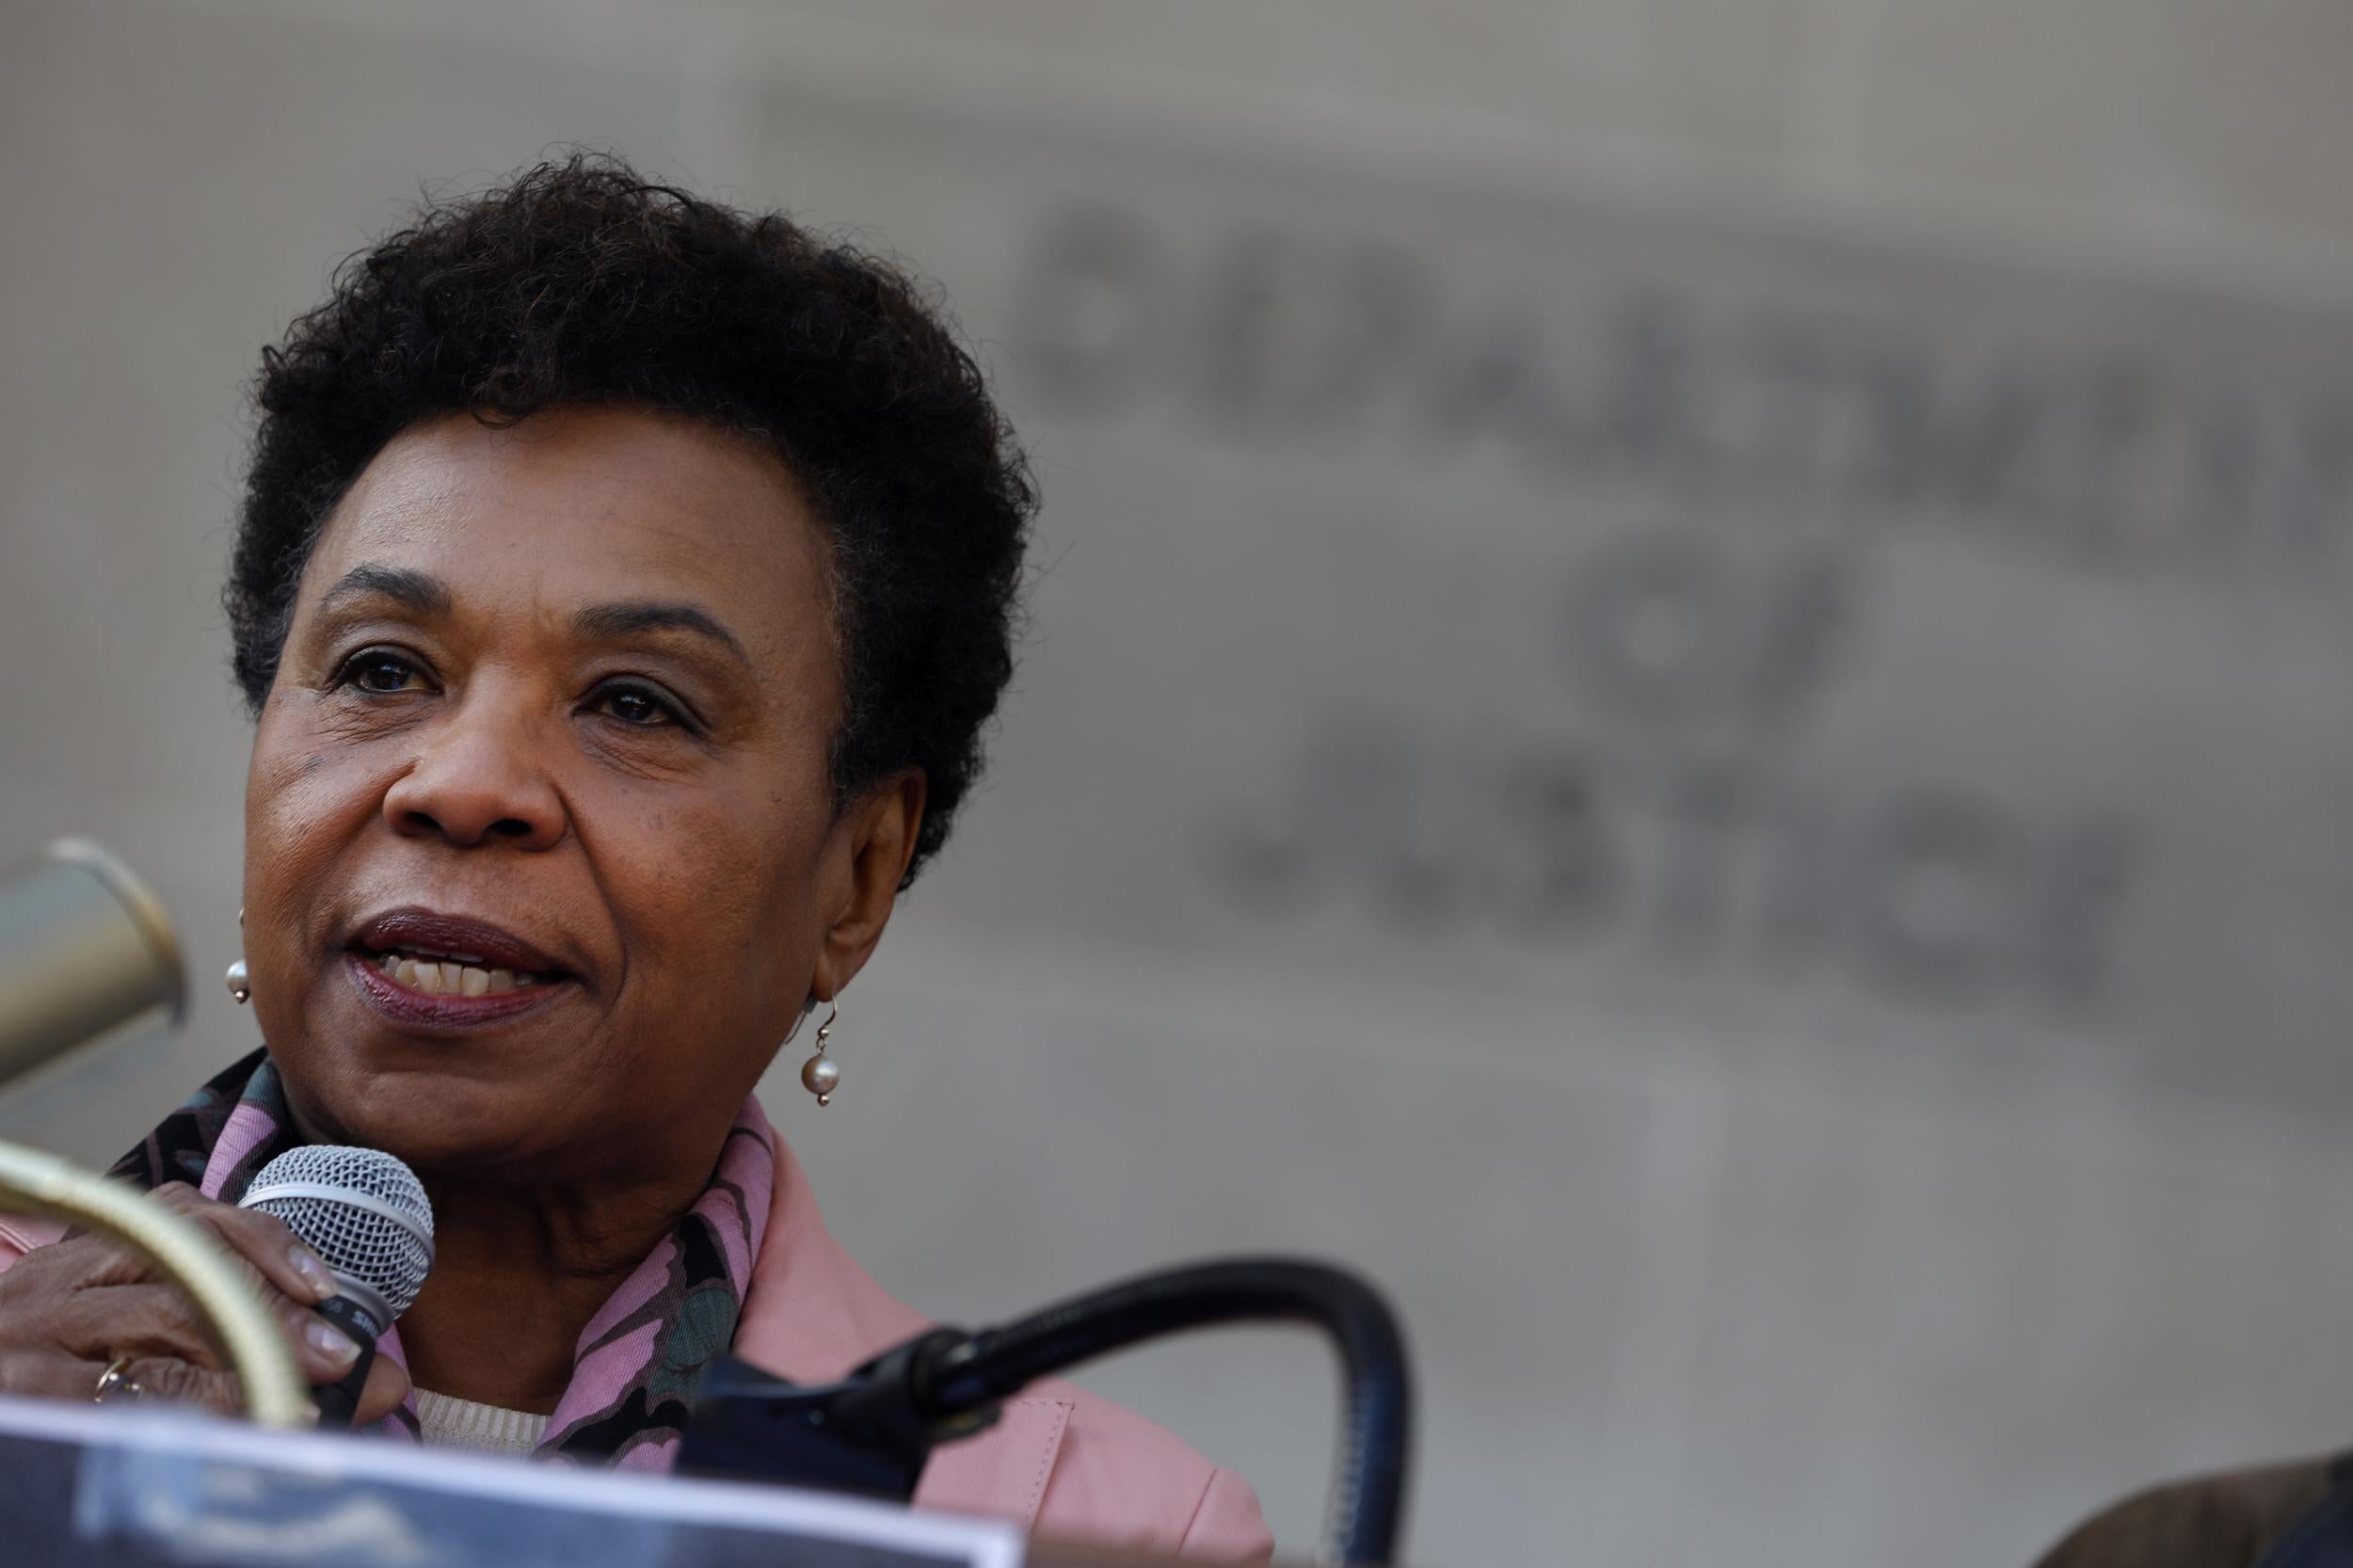 Representative Barbara Lee's amendment was stripped from the National Defense Authorization Act without a vote